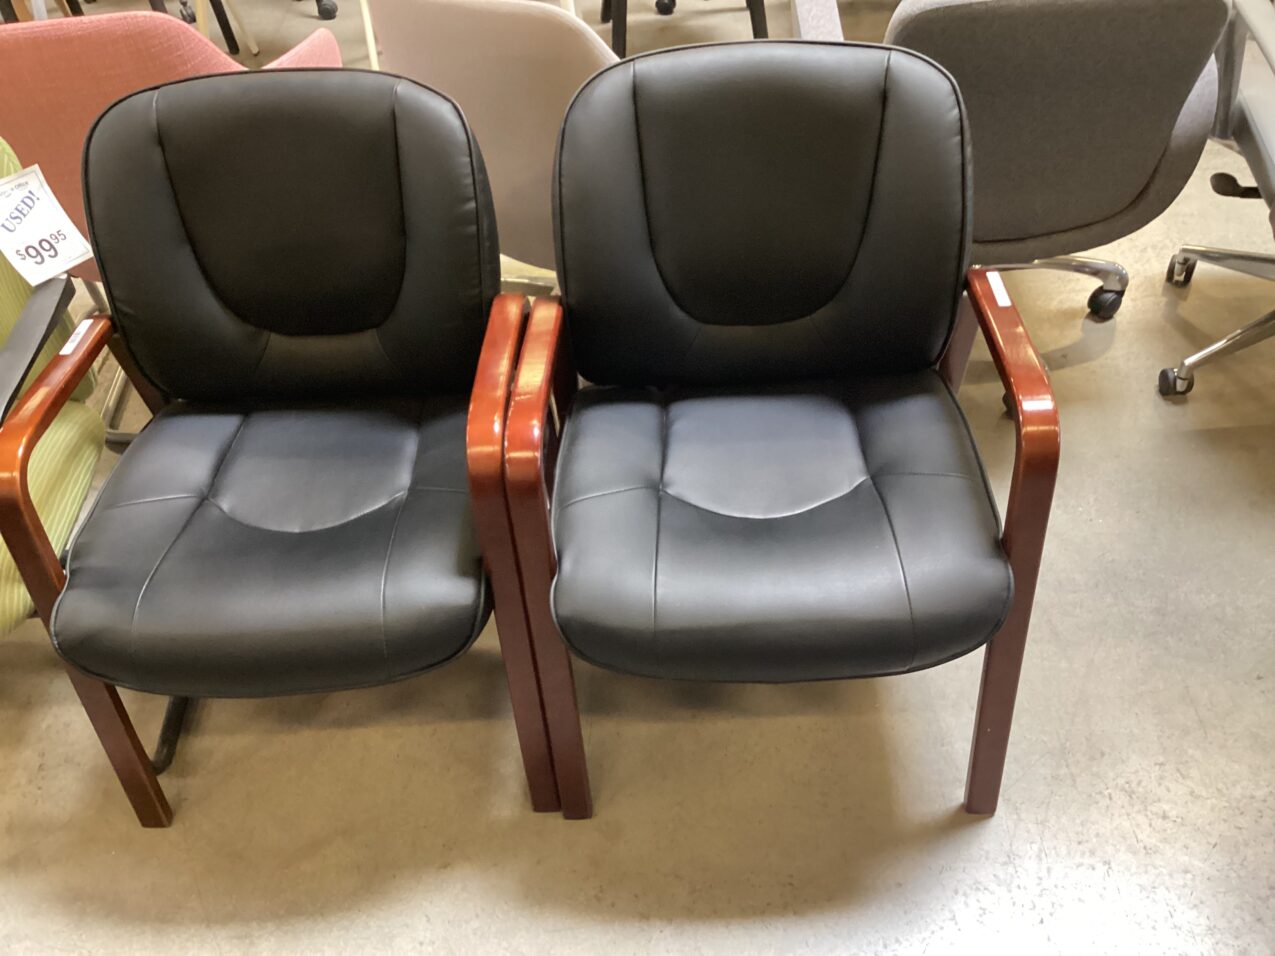 Used guest chairs